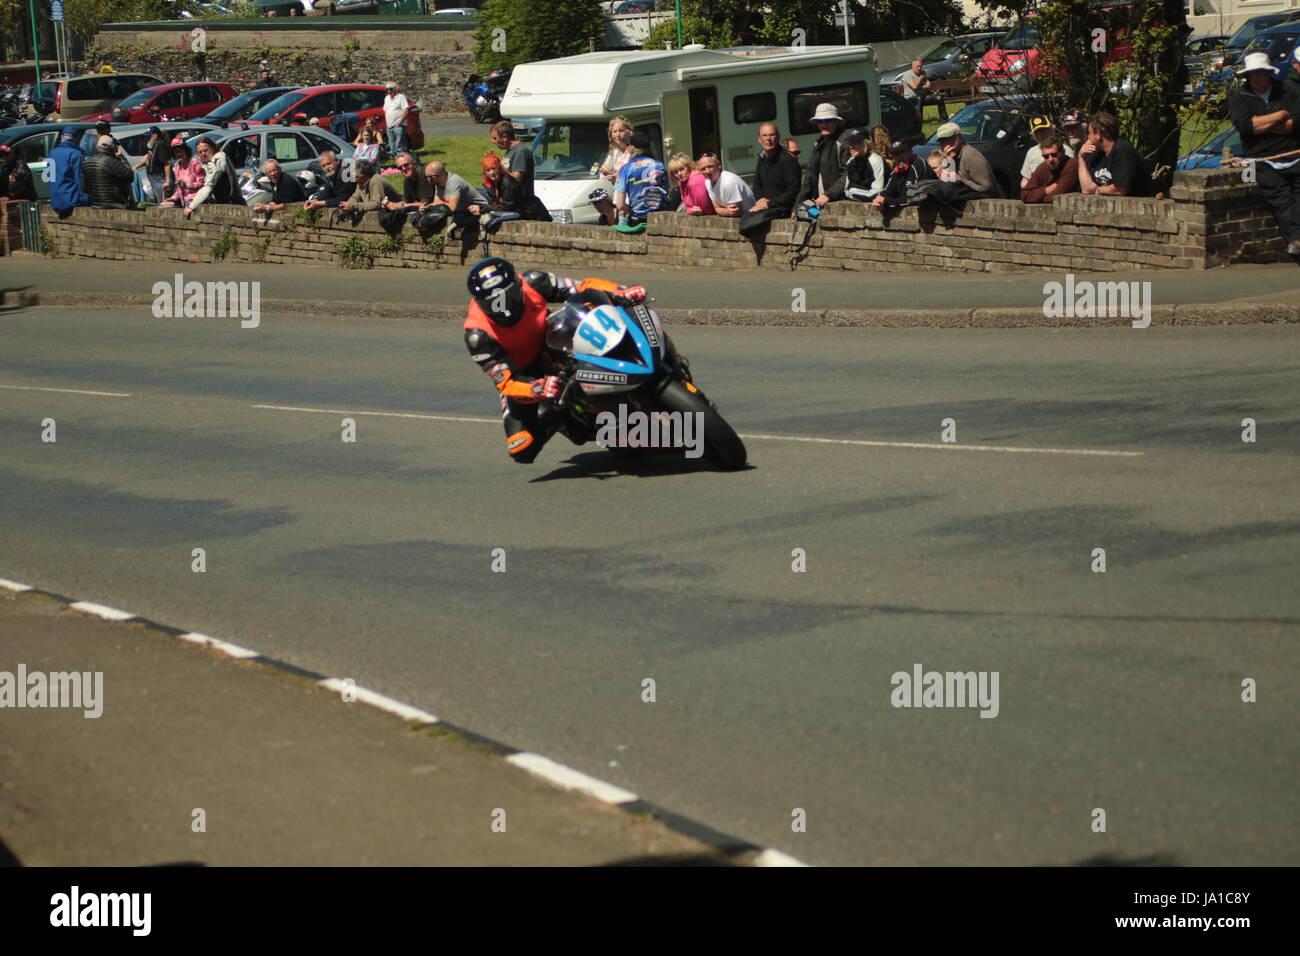 Isle of Man TT Races, Qualifying Practice Race, Saturday 3 June 2017.Supersport/Lightweight/Newcomers (all classes) qualifying session. Rider/Team details to be added soon. Credit: Eclectic Art and Photography/Alamy Live News Stock Photo